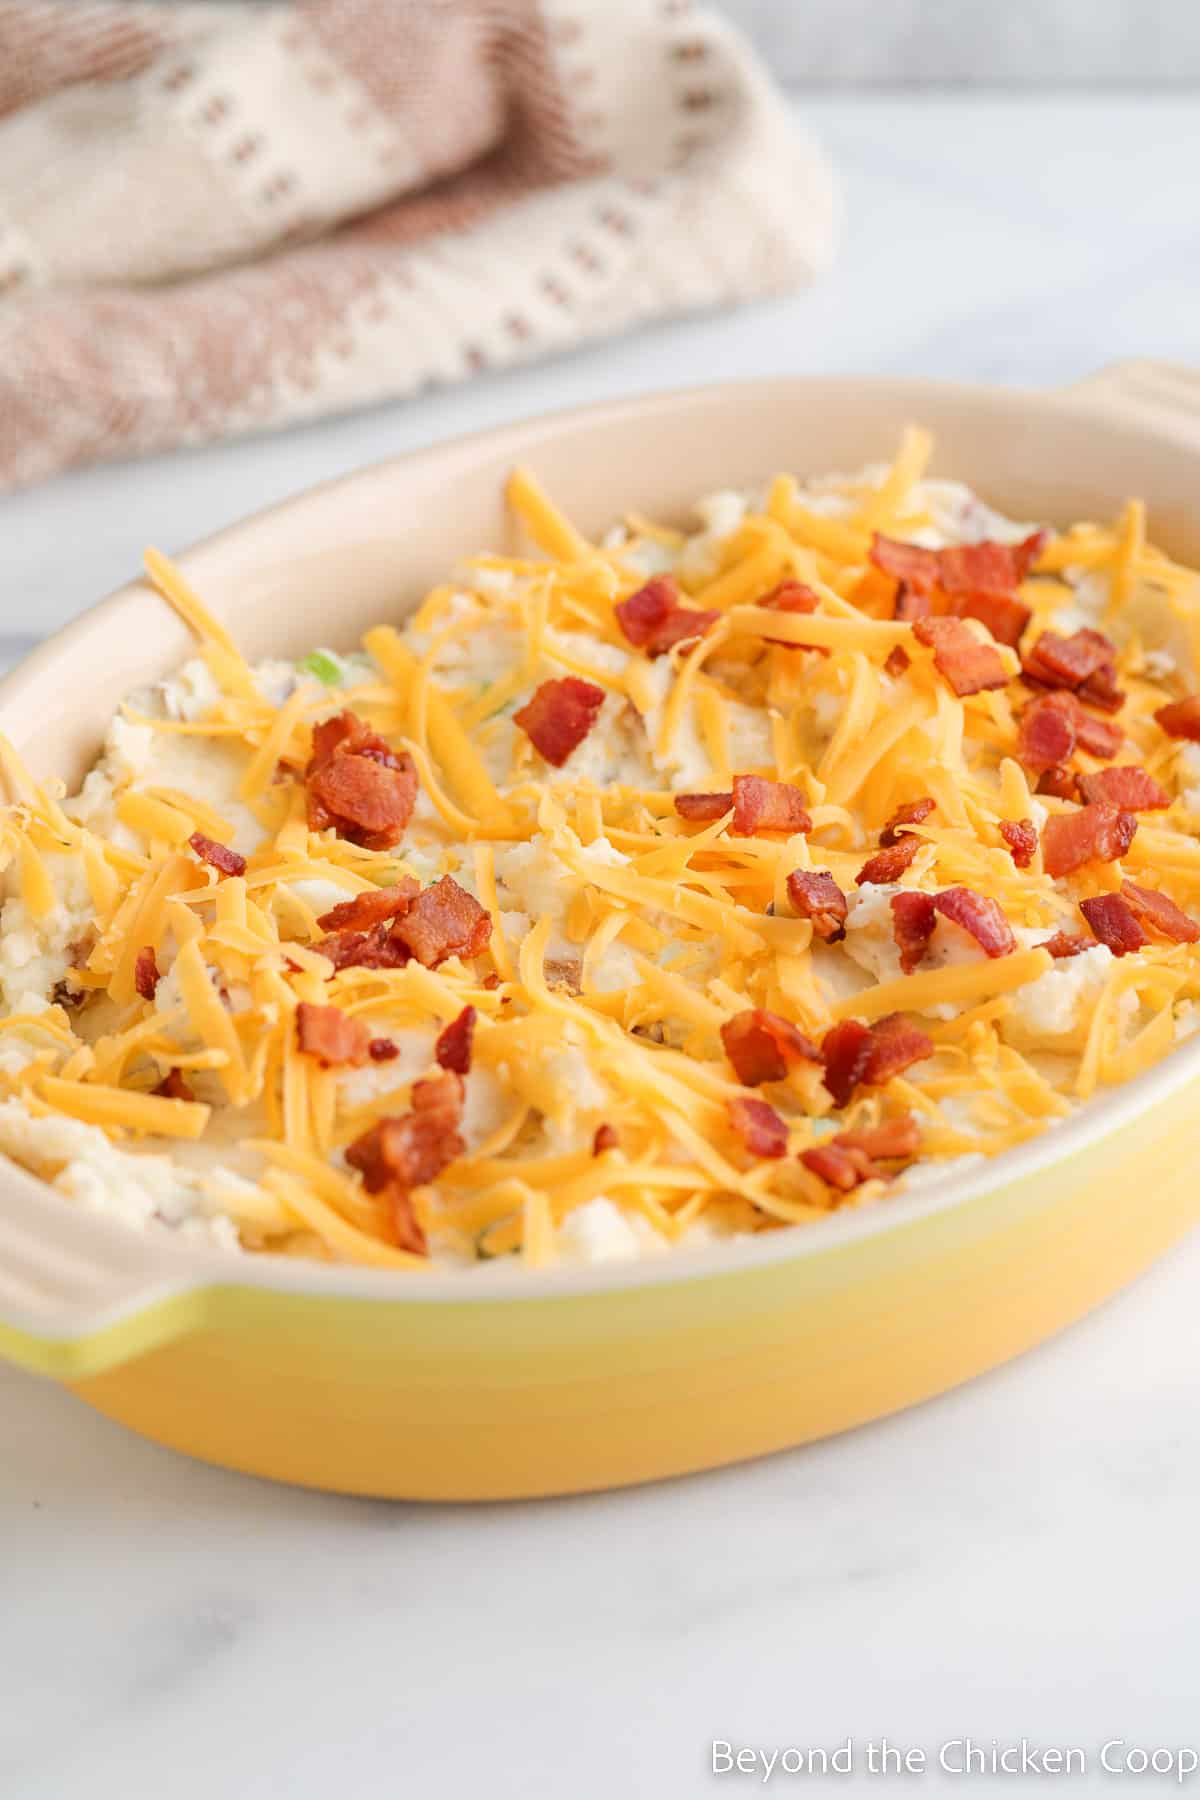 An unbaked casserole topped with cheese and bacon.